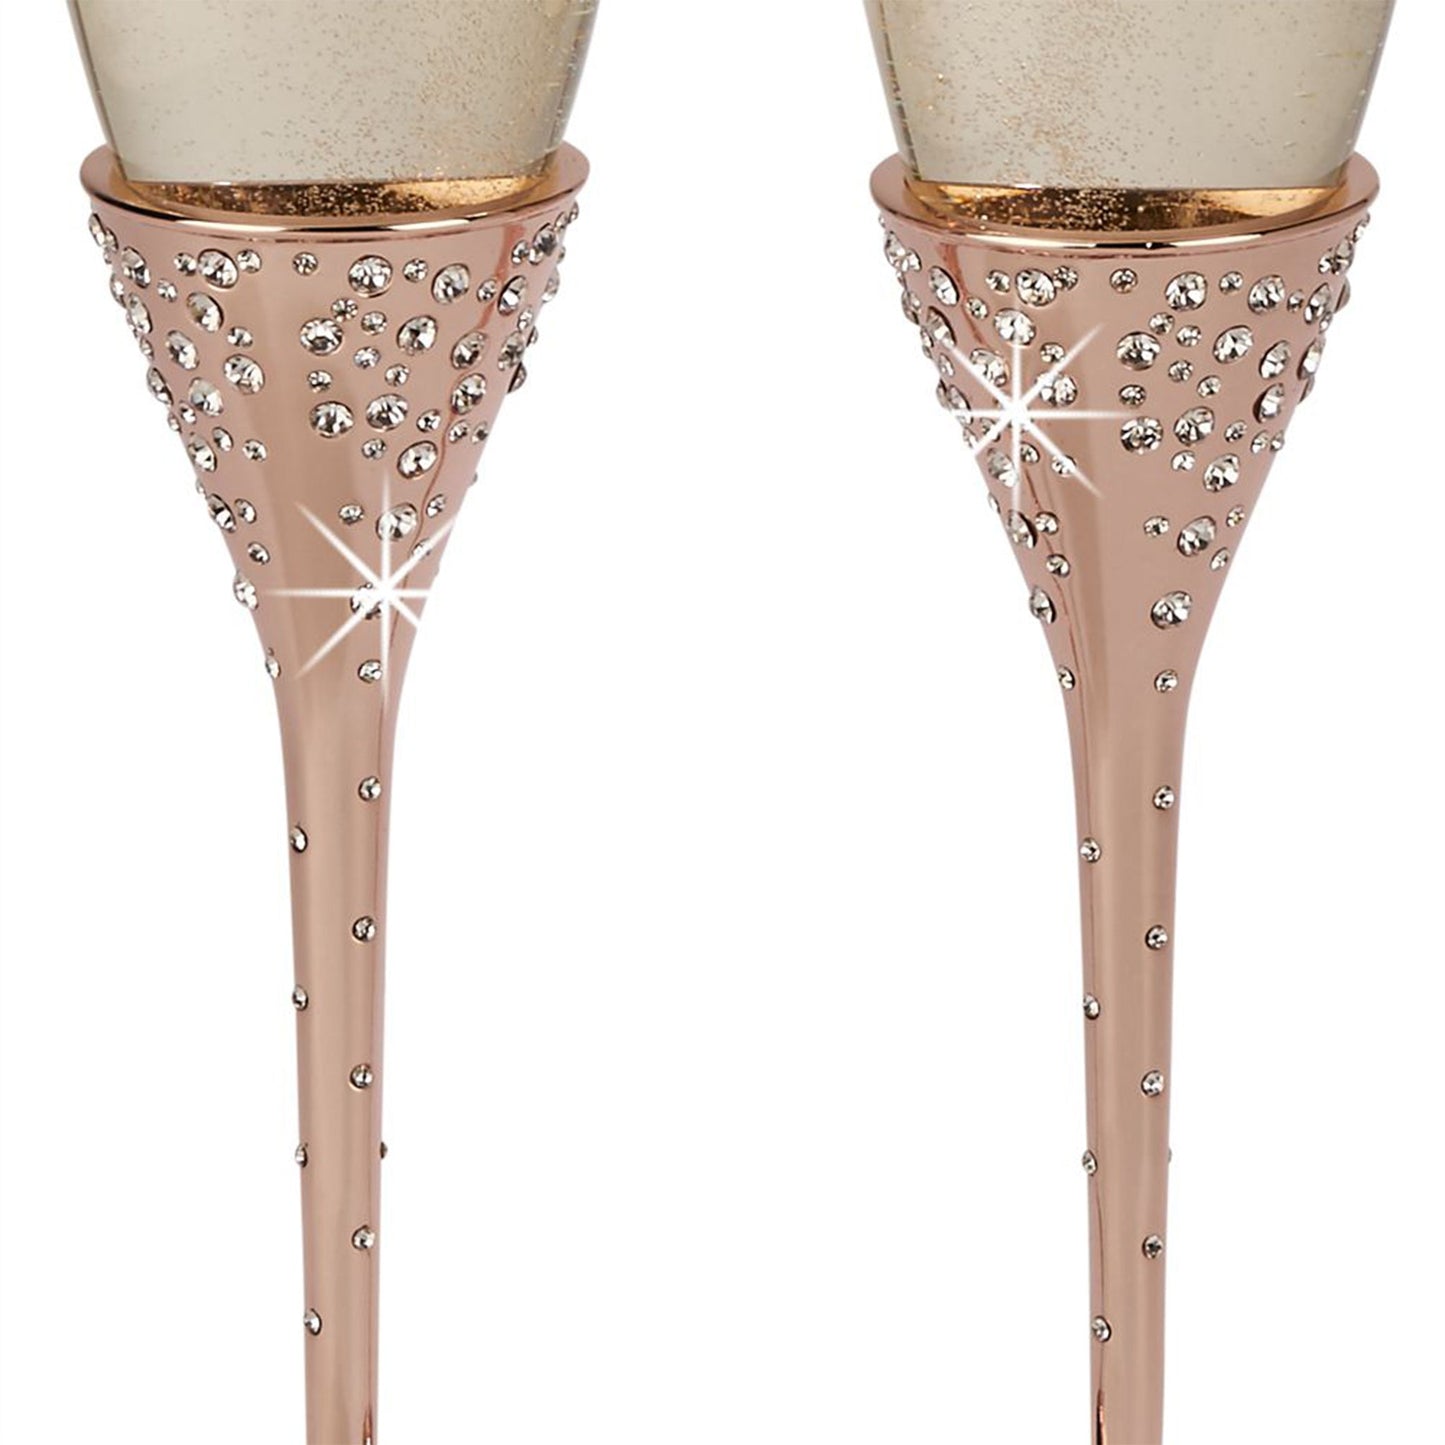 Galaxy Rose Gold Champagne Flutes Set by Creative Gifts